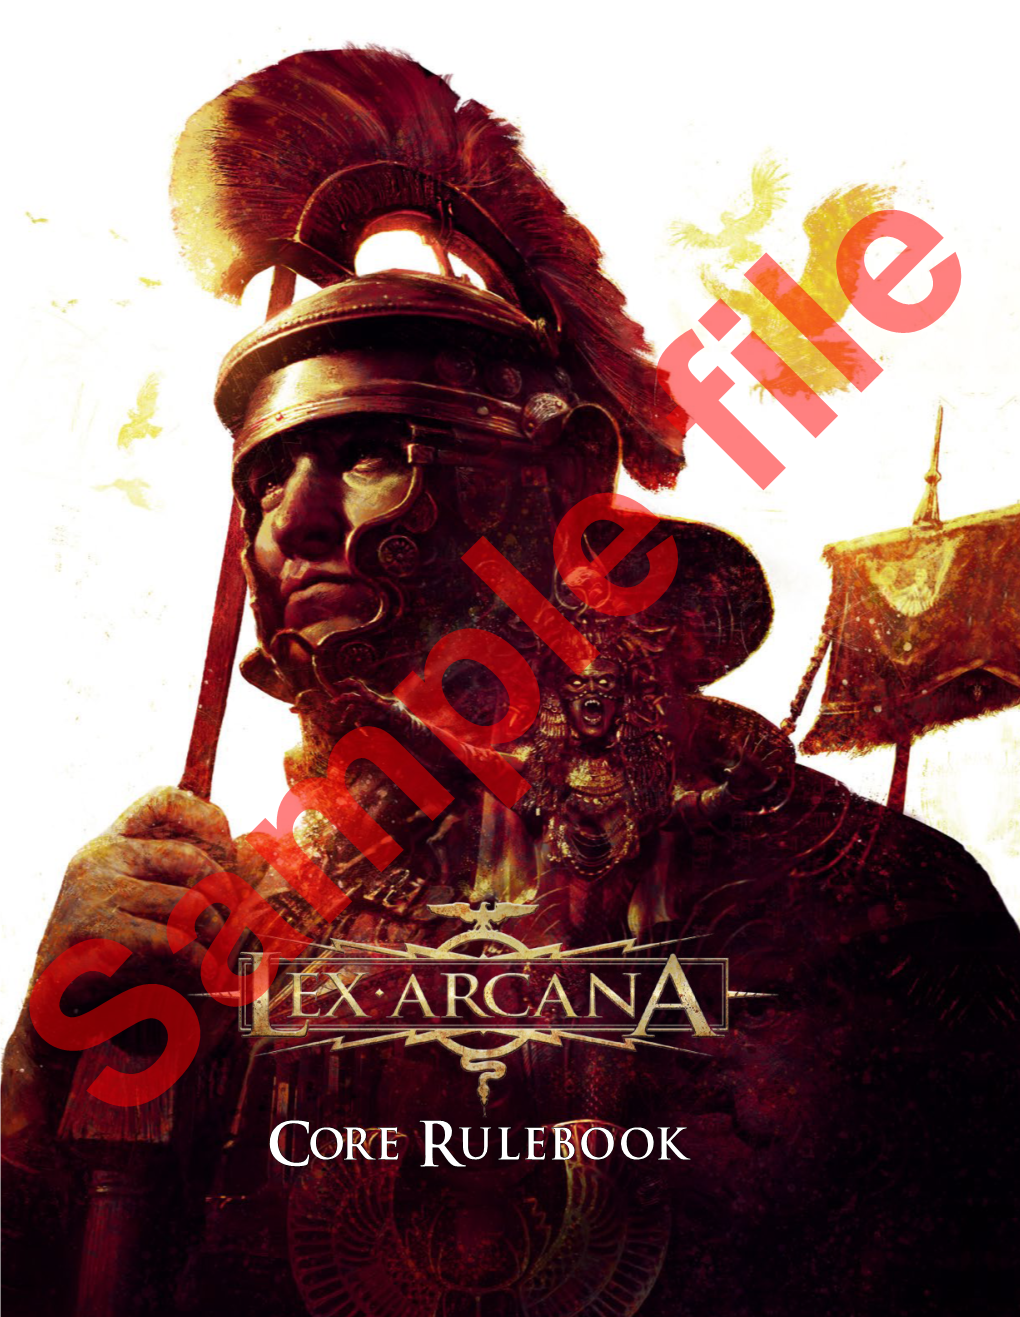 Lex Arcana Is the Alternate History Role-Playing Game Set in a Roman Empire Which Did Not Fall